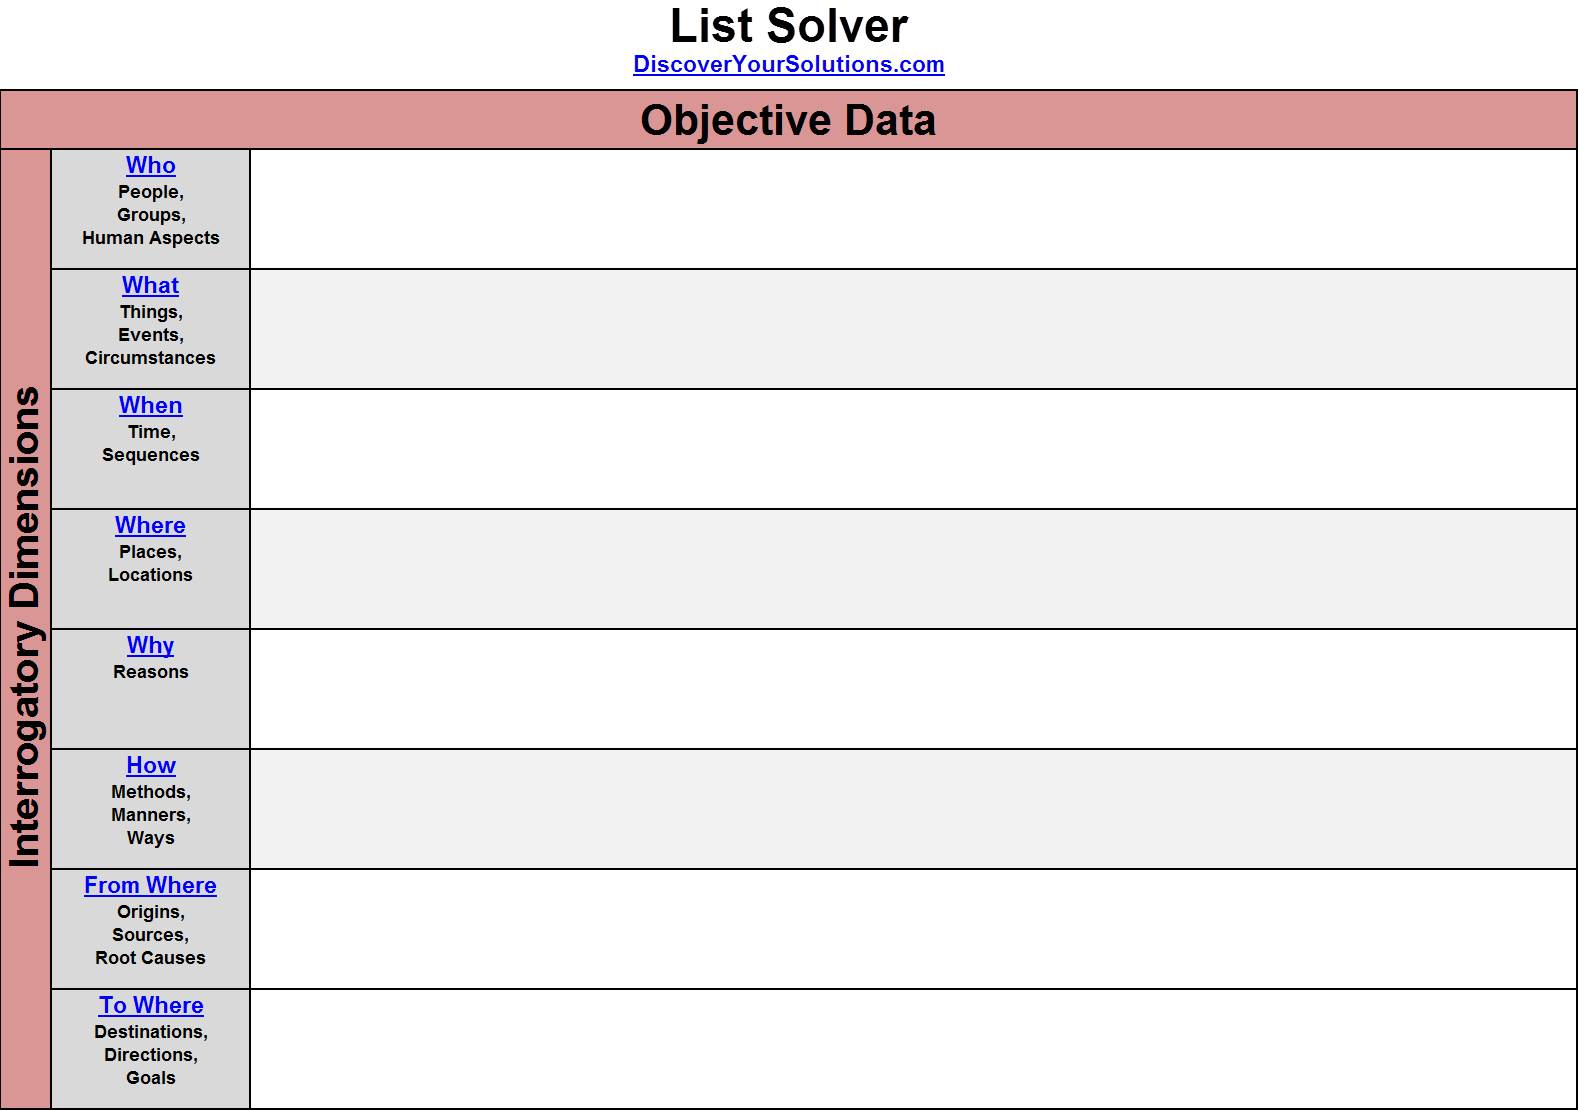 List Solver for Objective Data